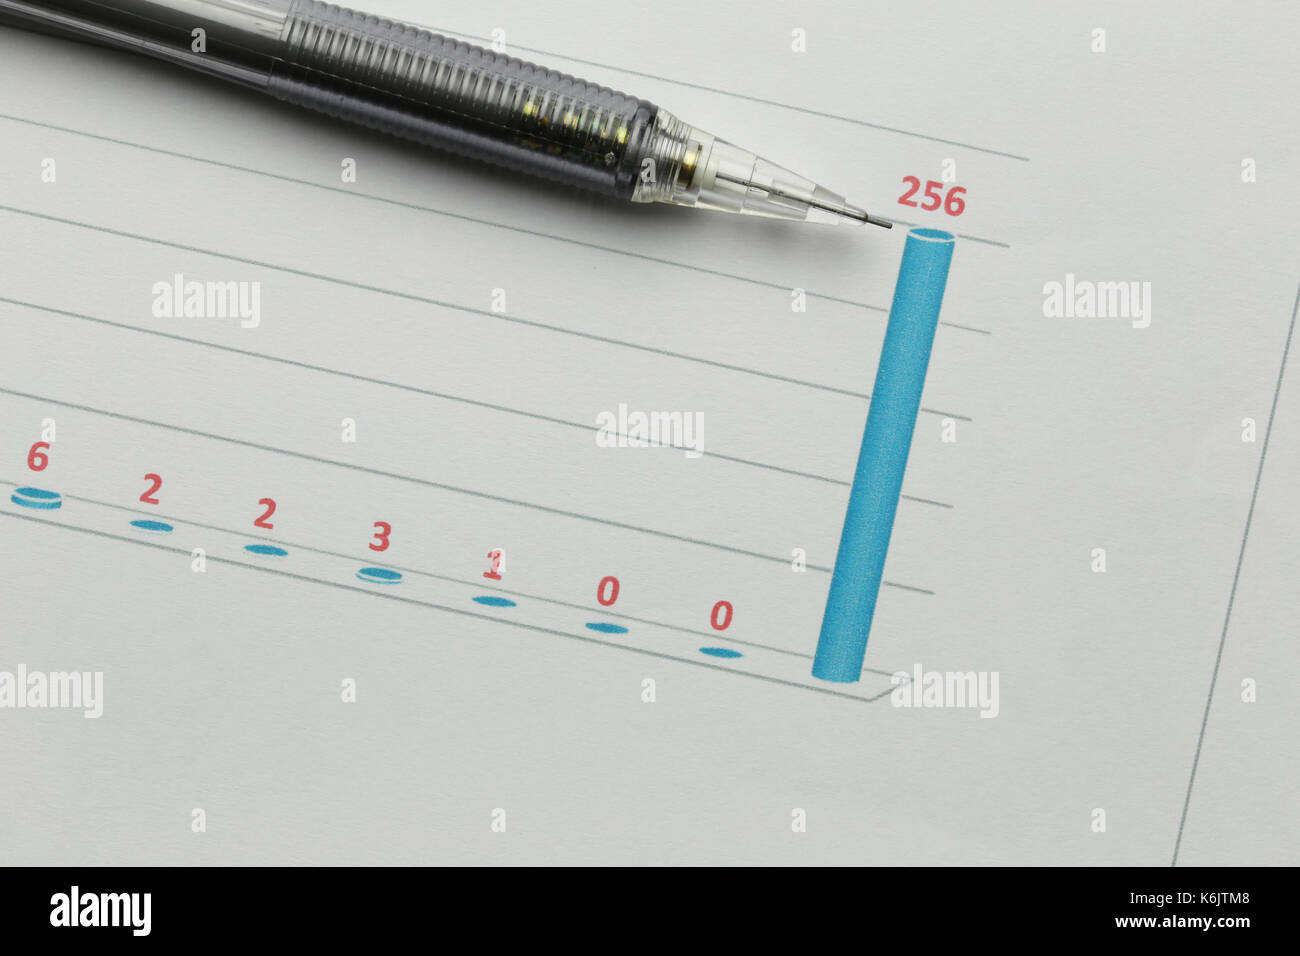 Black pen placed on business graph paper in concept of profitability and analysis of business information. Stock Photo